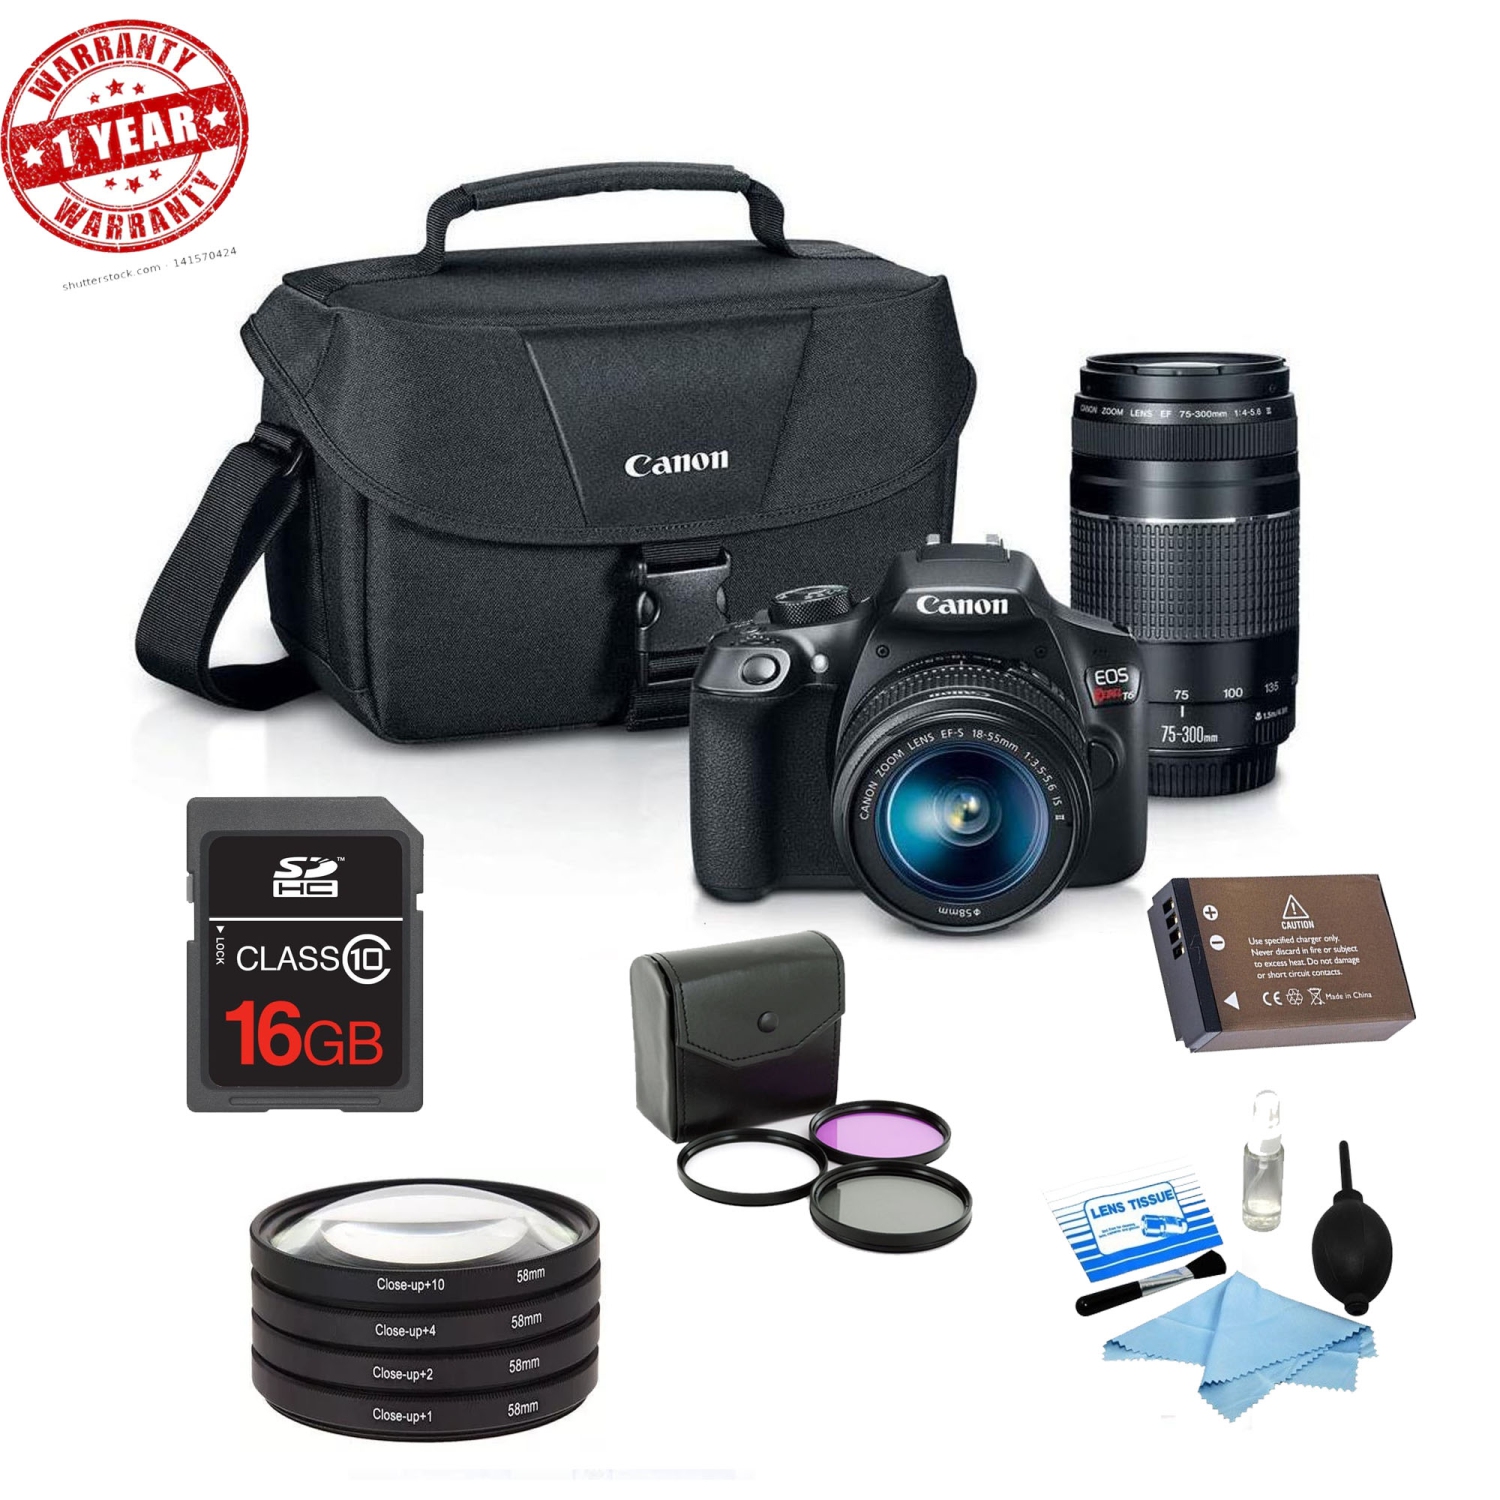 Canon EOS Rebel T6 DSLR with 18-55mm IS & 75-300mm III Lens | 16GB MC | Spare Battery Bundle - US Version w/ Seller Warranty